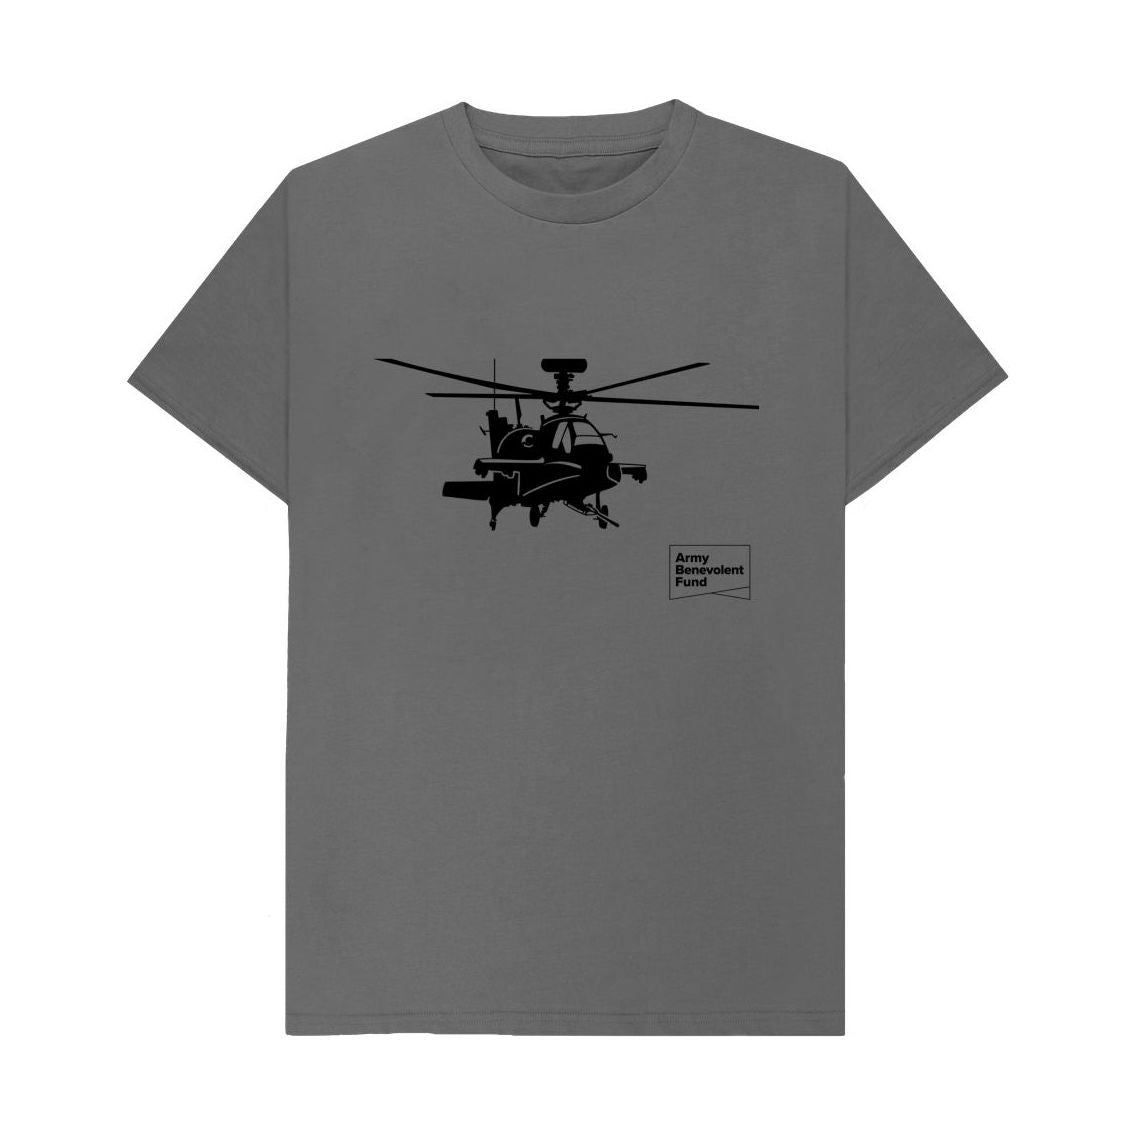 Slate Grey Helicopter Silhouette T-shirt